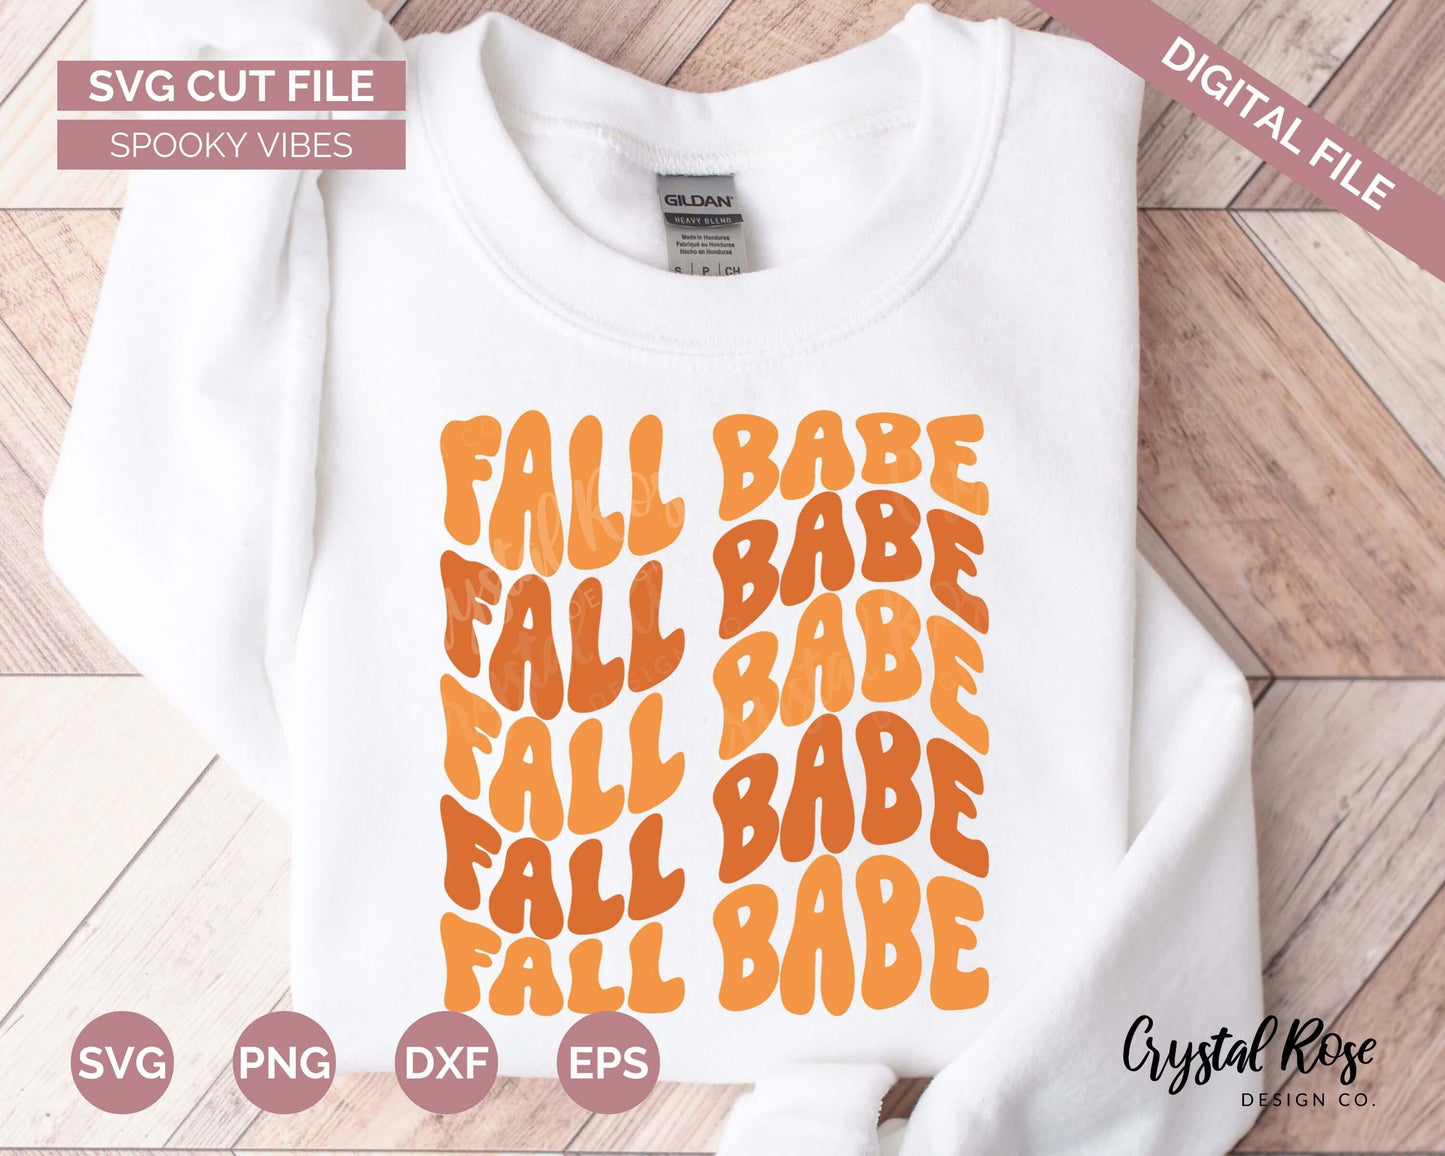 Fall Babe SVG, Halloween SVG, Digital Download, Cricut, Silhouette, Glowforge (includes svg/png/dxf/eps)